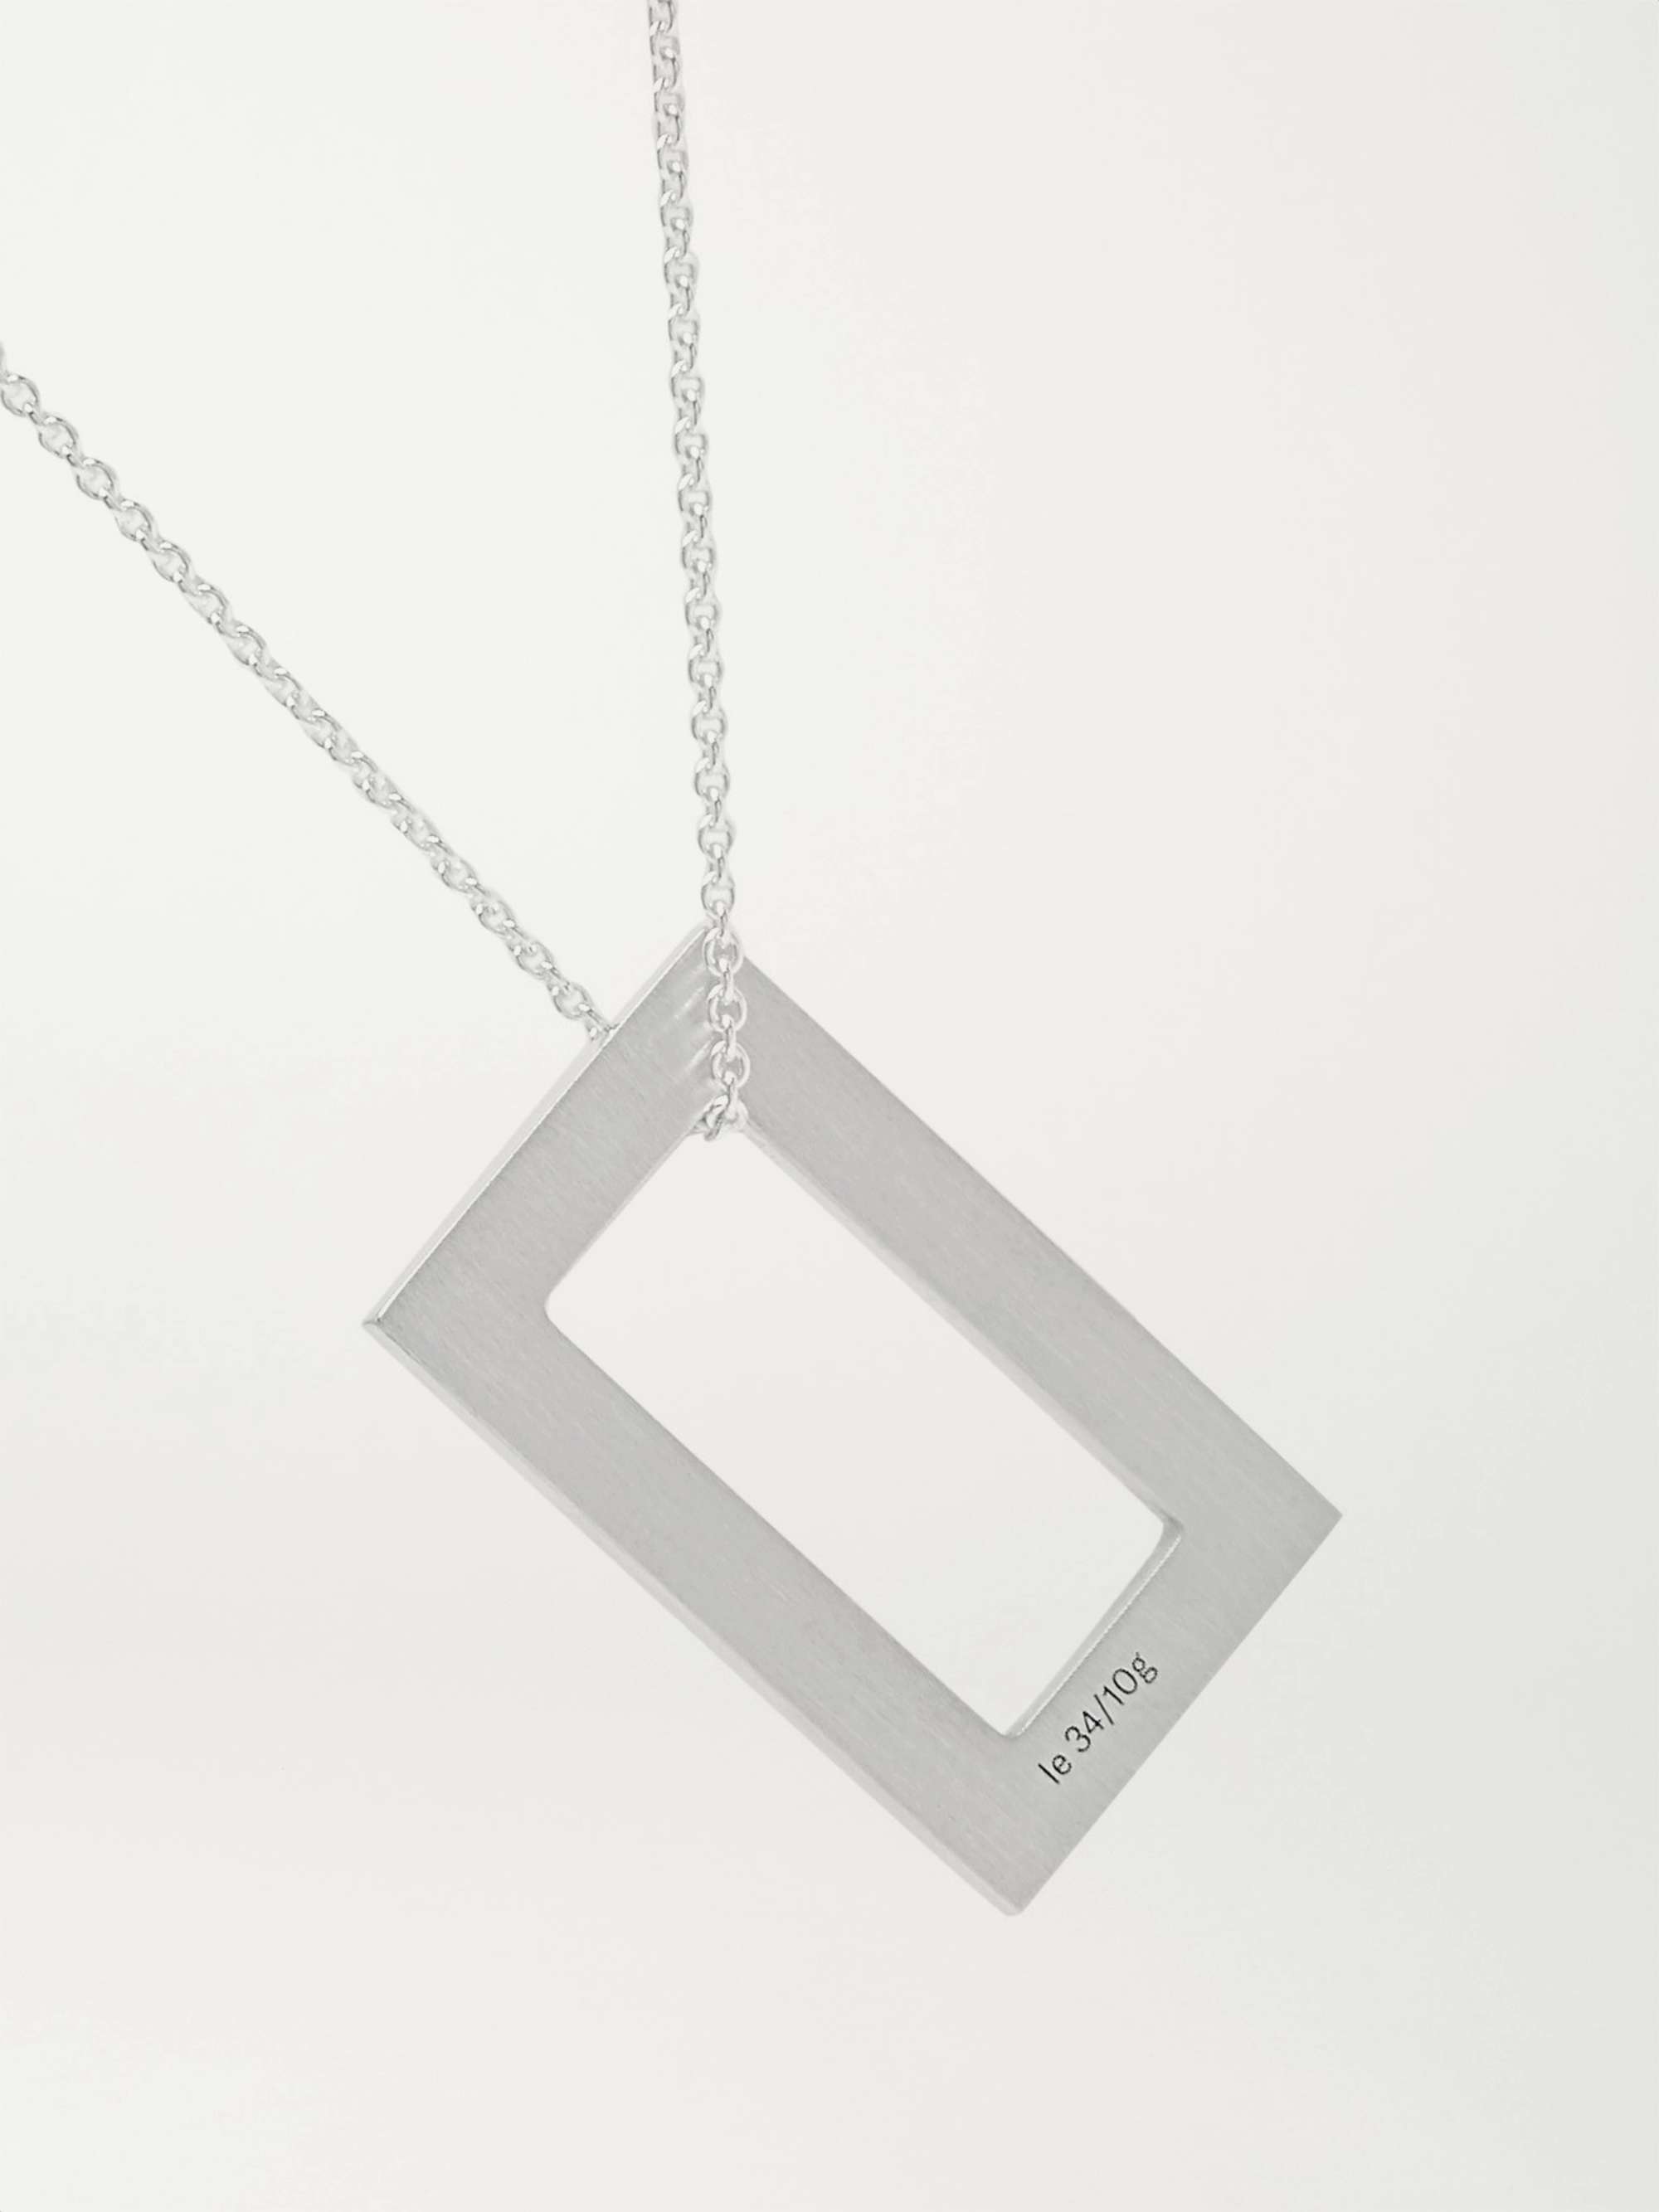 LE GRAMME 34/10ths Sterling Silver Necklace